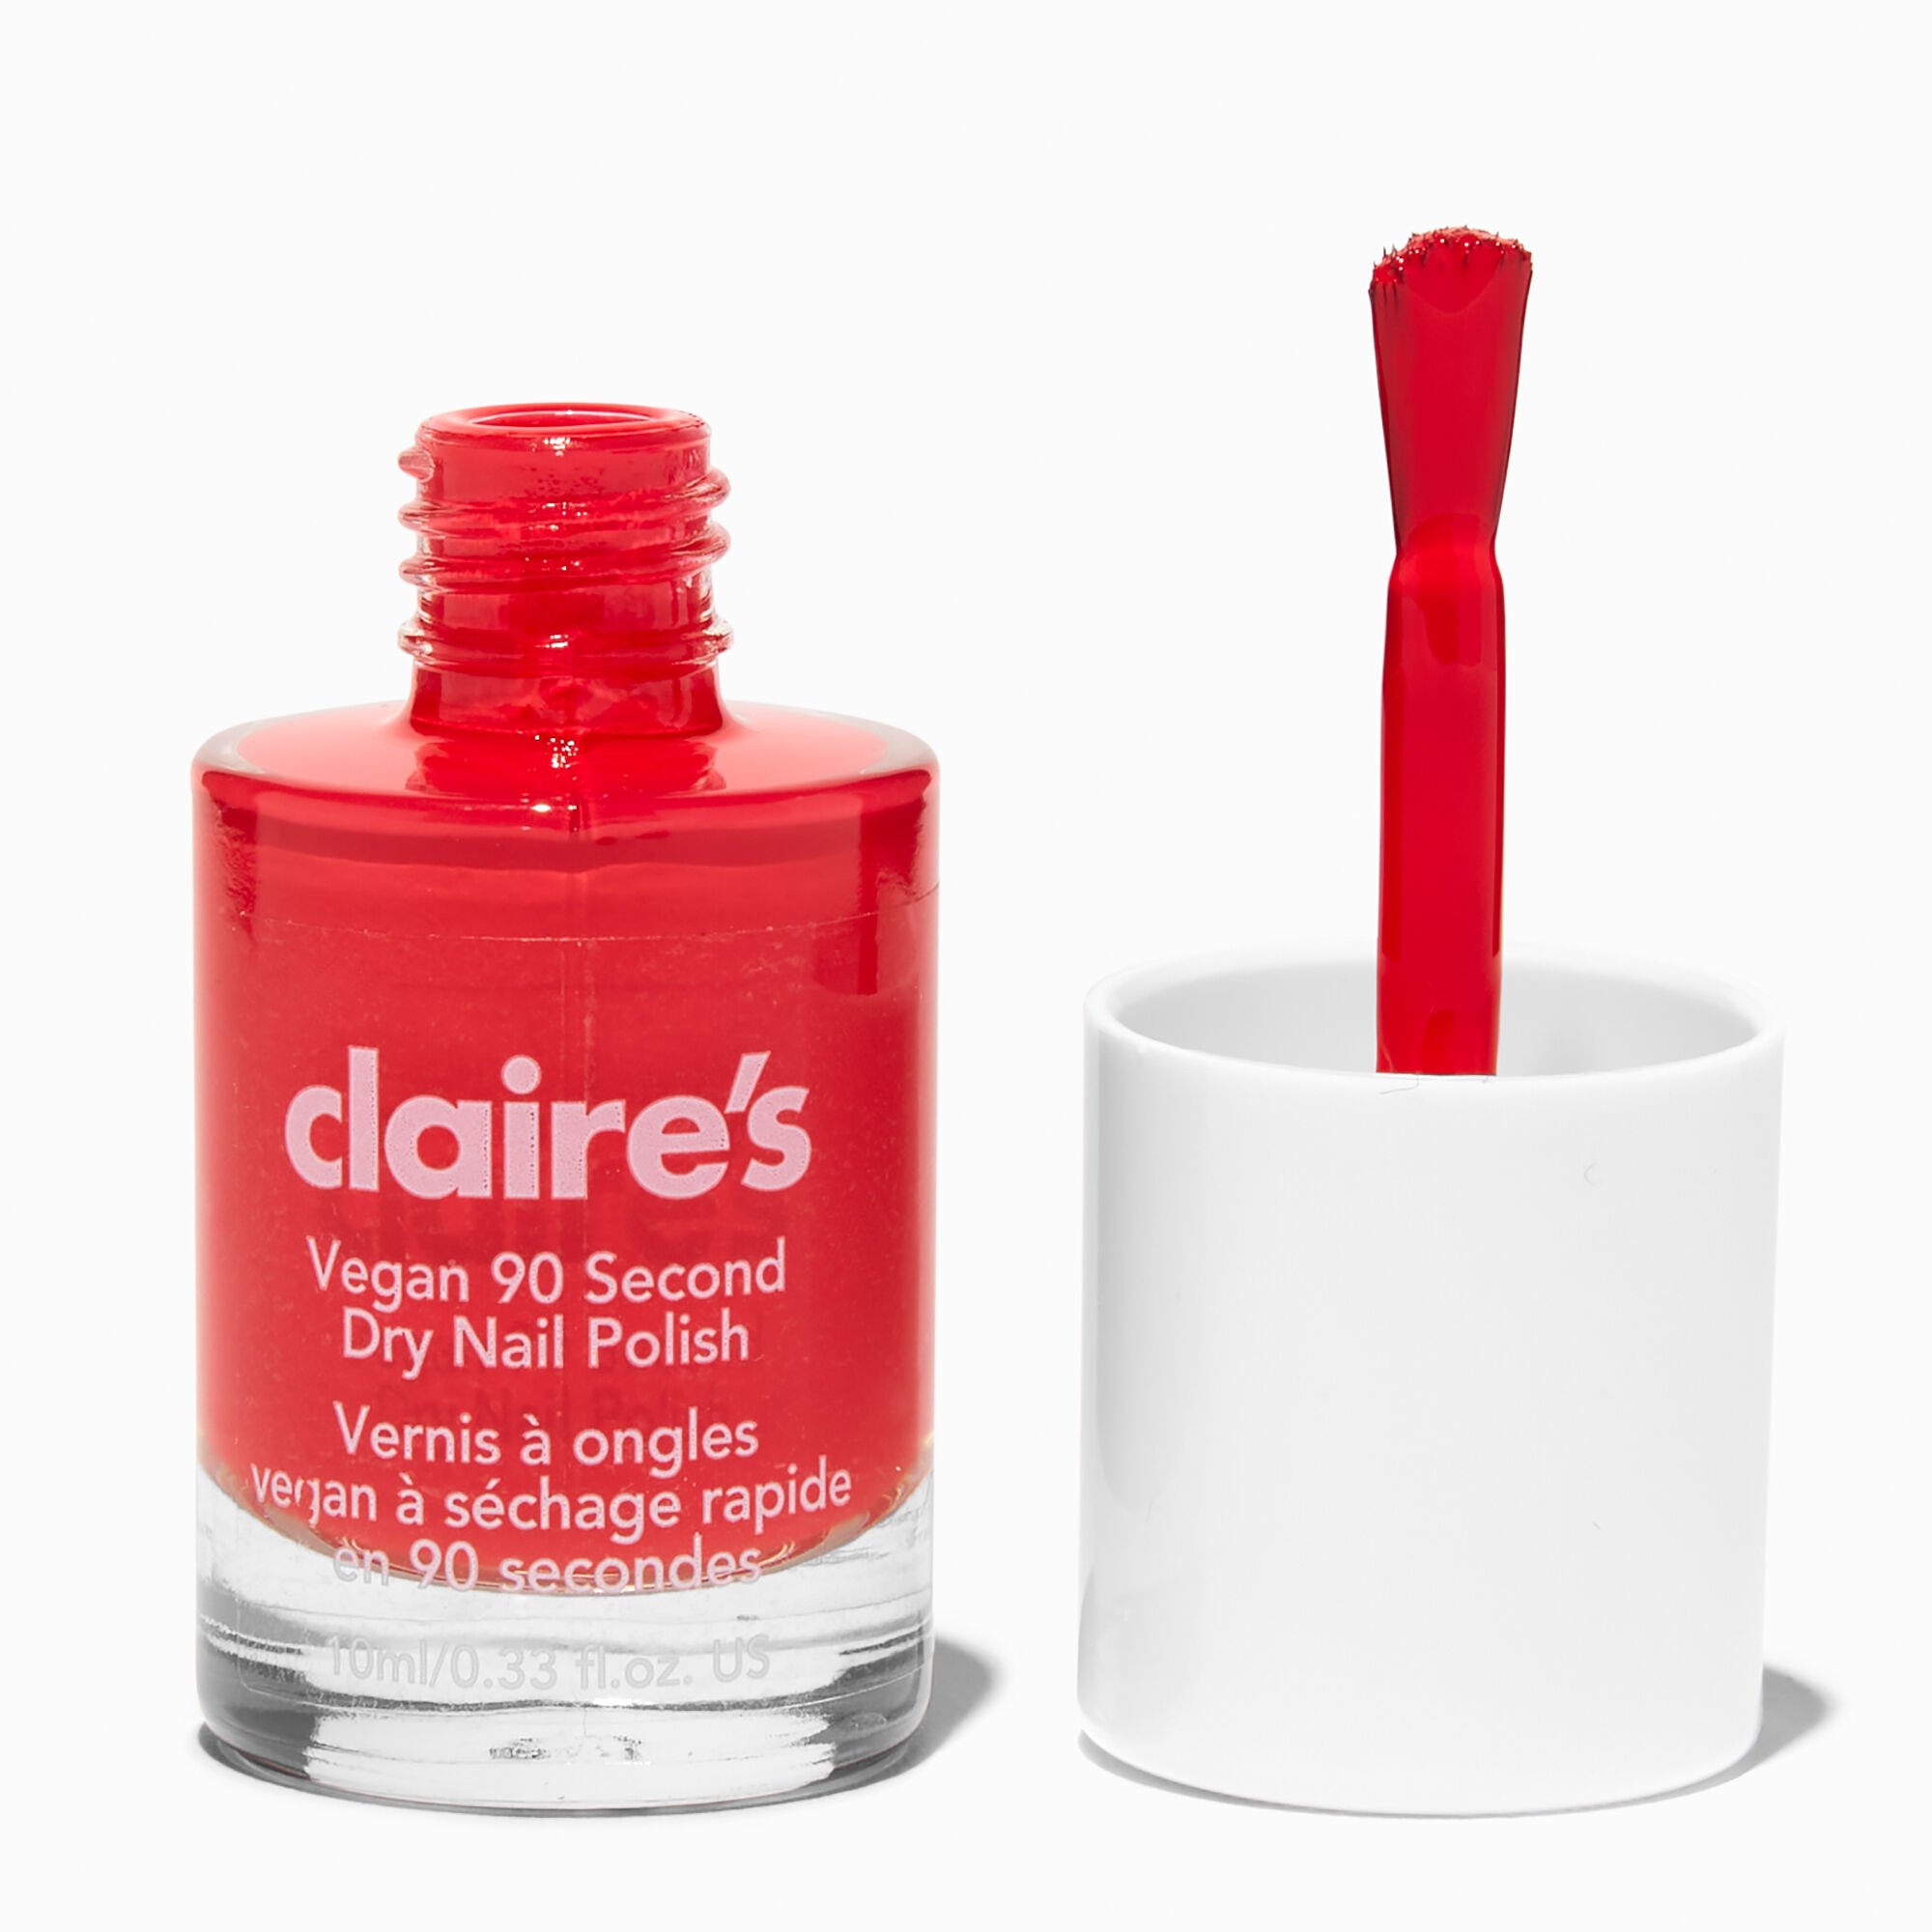 View Claires Vegan 90 Second Dry Nail Polish Watermelon Wish information